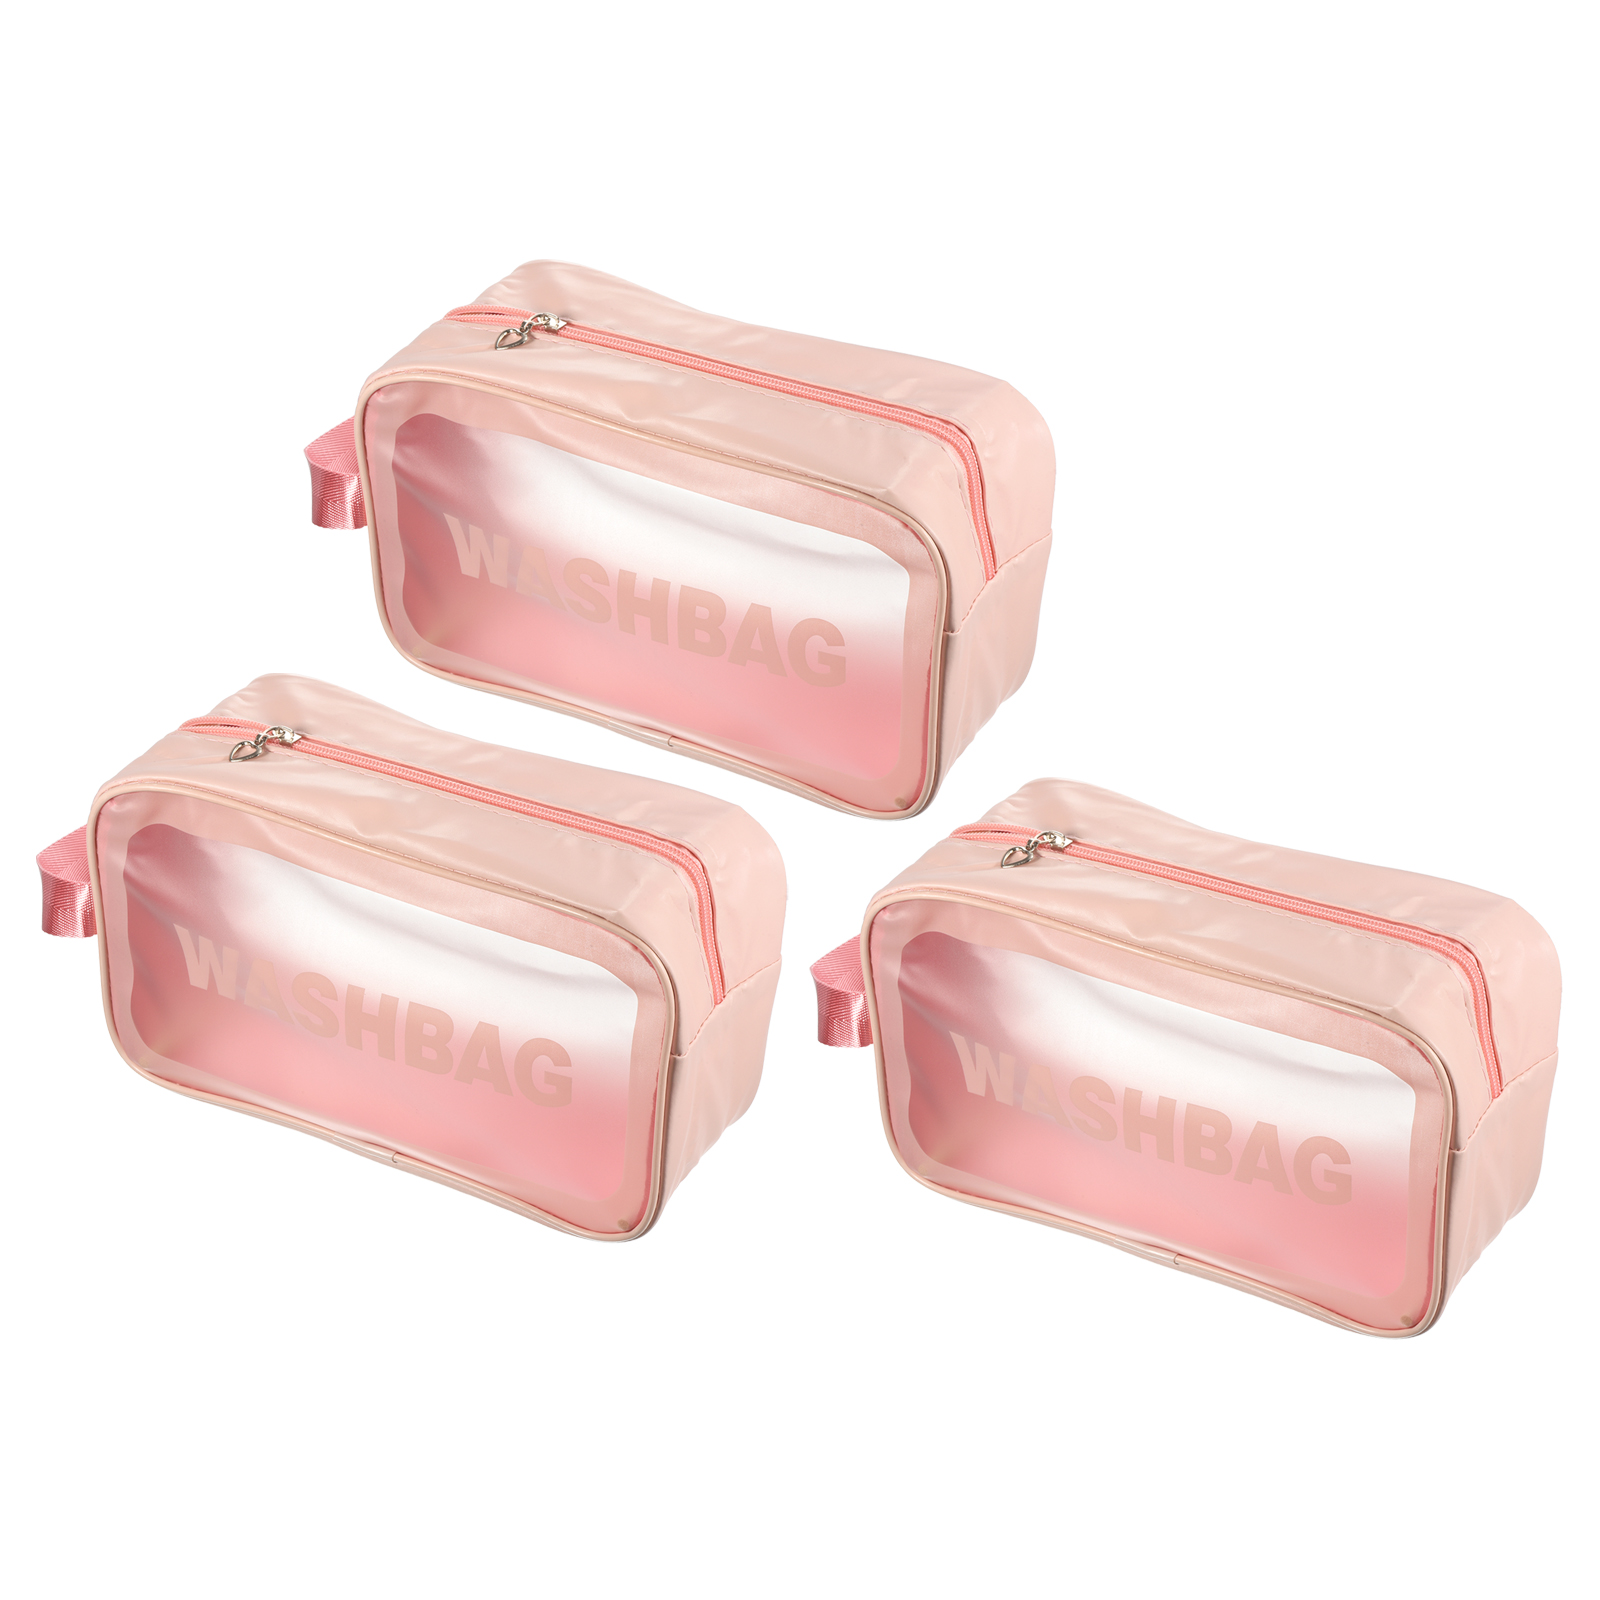 Uxcell 5.9"x9.8"x3.7" PVC Clear Toiletry Bag Makeup Bags with Zipper Handle Pink 3 Pack - image 1 of 5